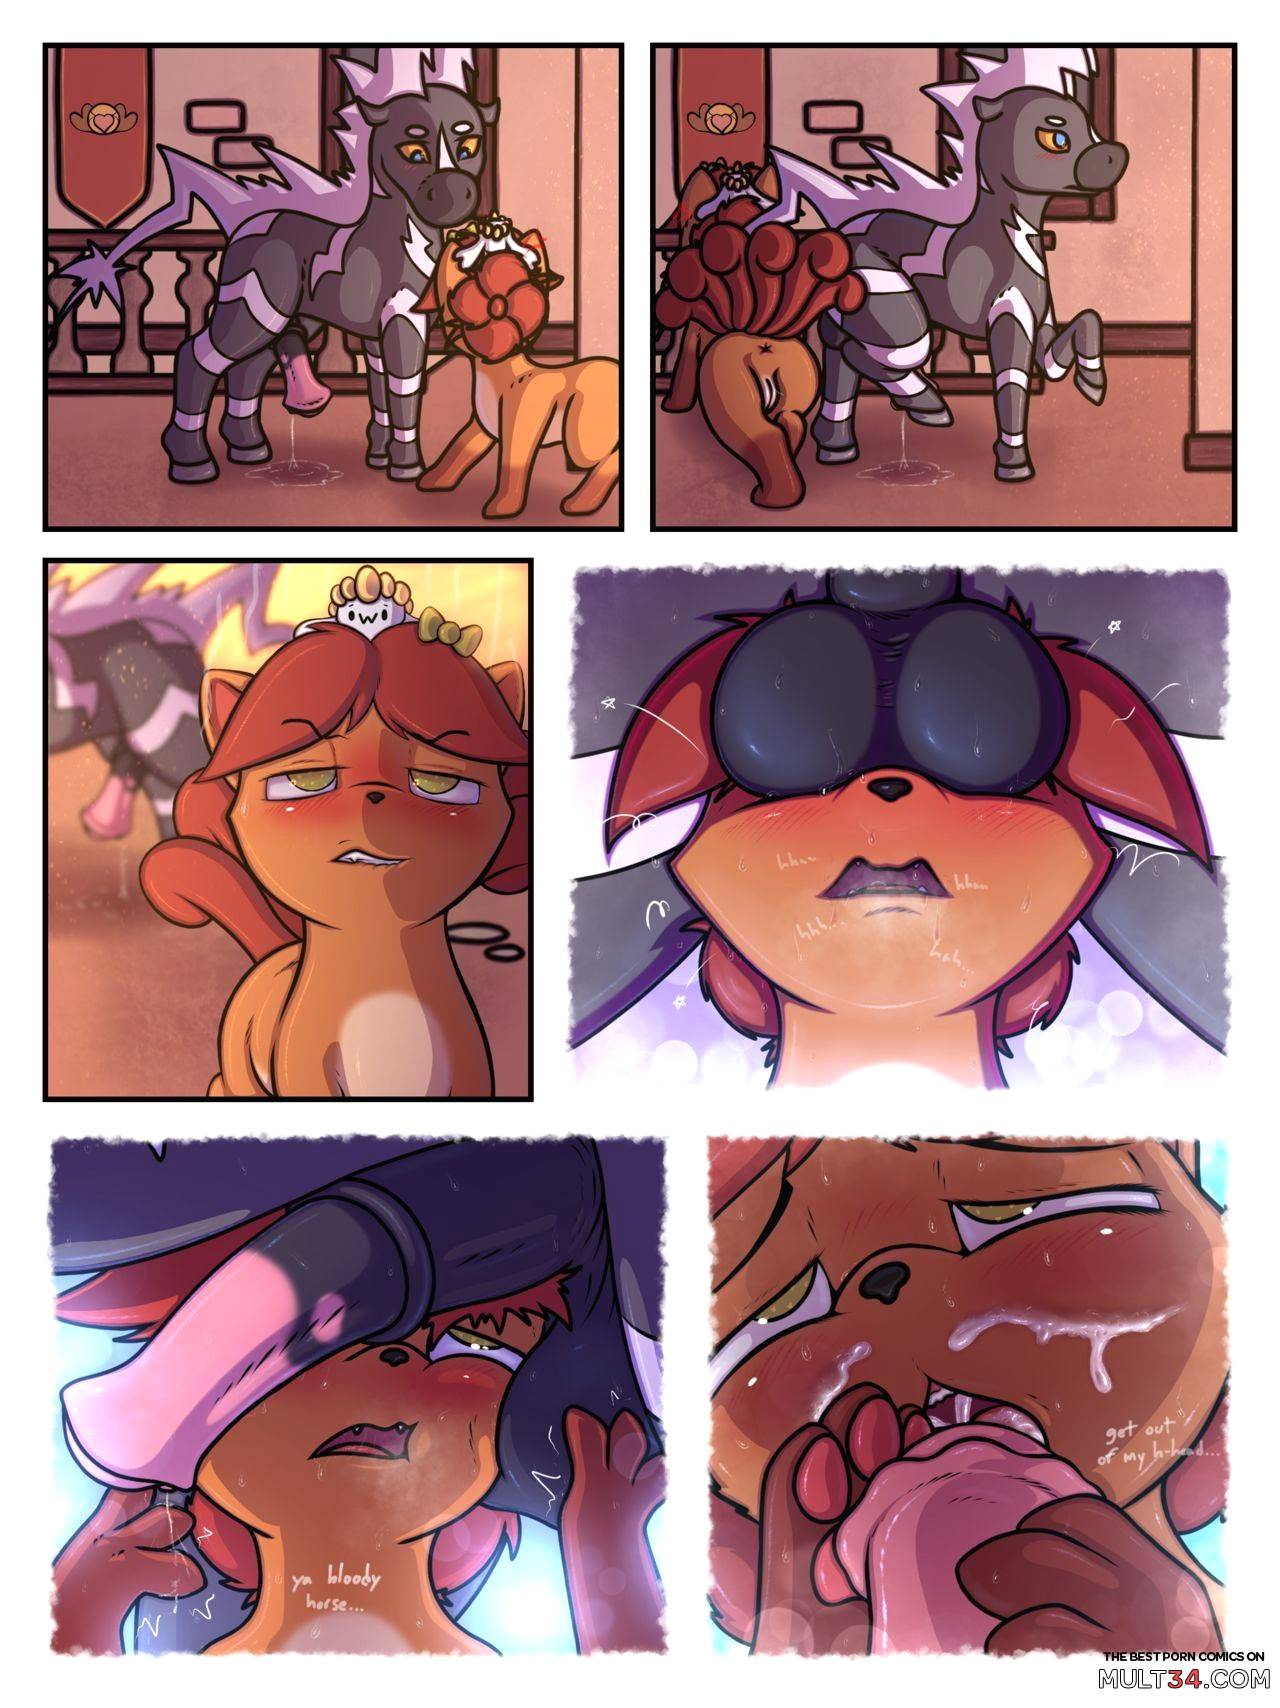 Wanderlust chapter 1 page 16